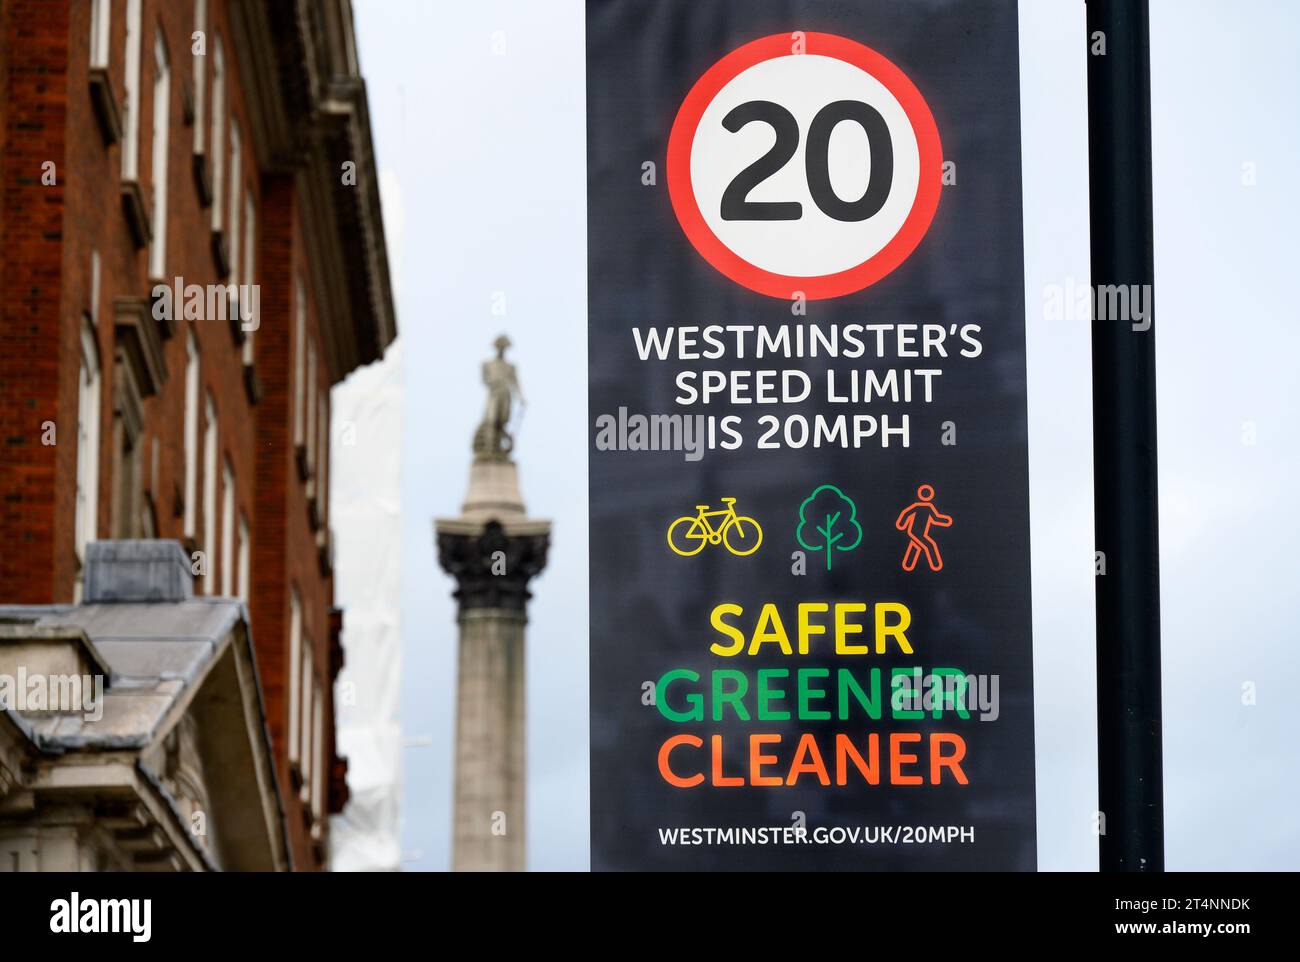 London, UK. 20 mph zone in Whitehall, Westminster - Nelson's Collumn behind Stock Photo